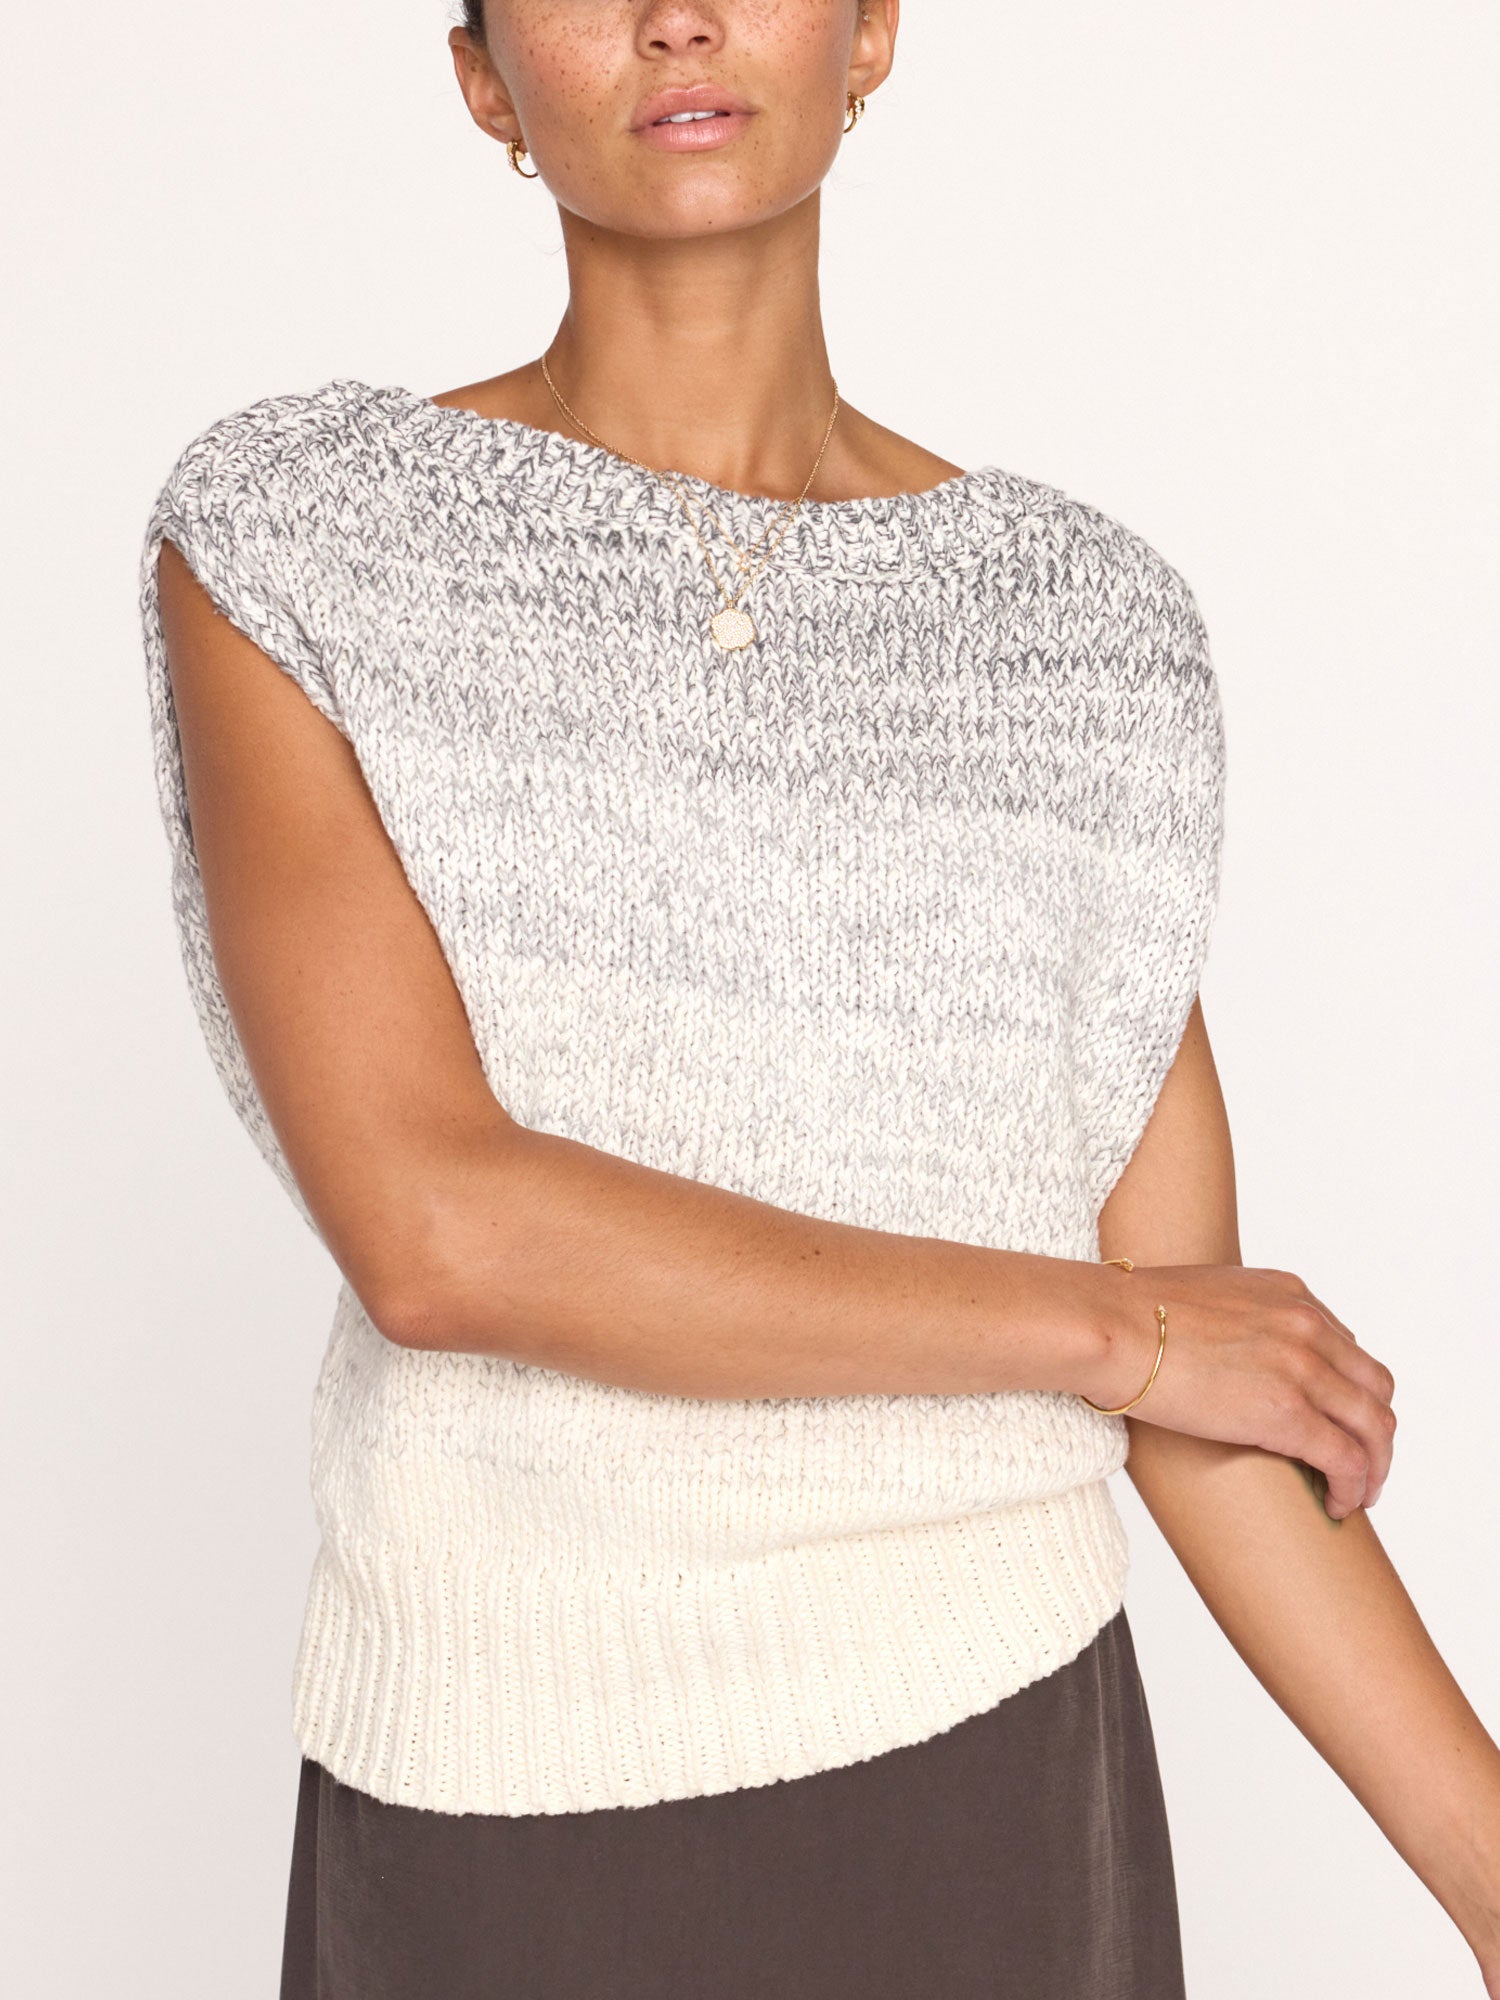 Noah sleeveless boatneck ombre sweater beige/grey  front view 4